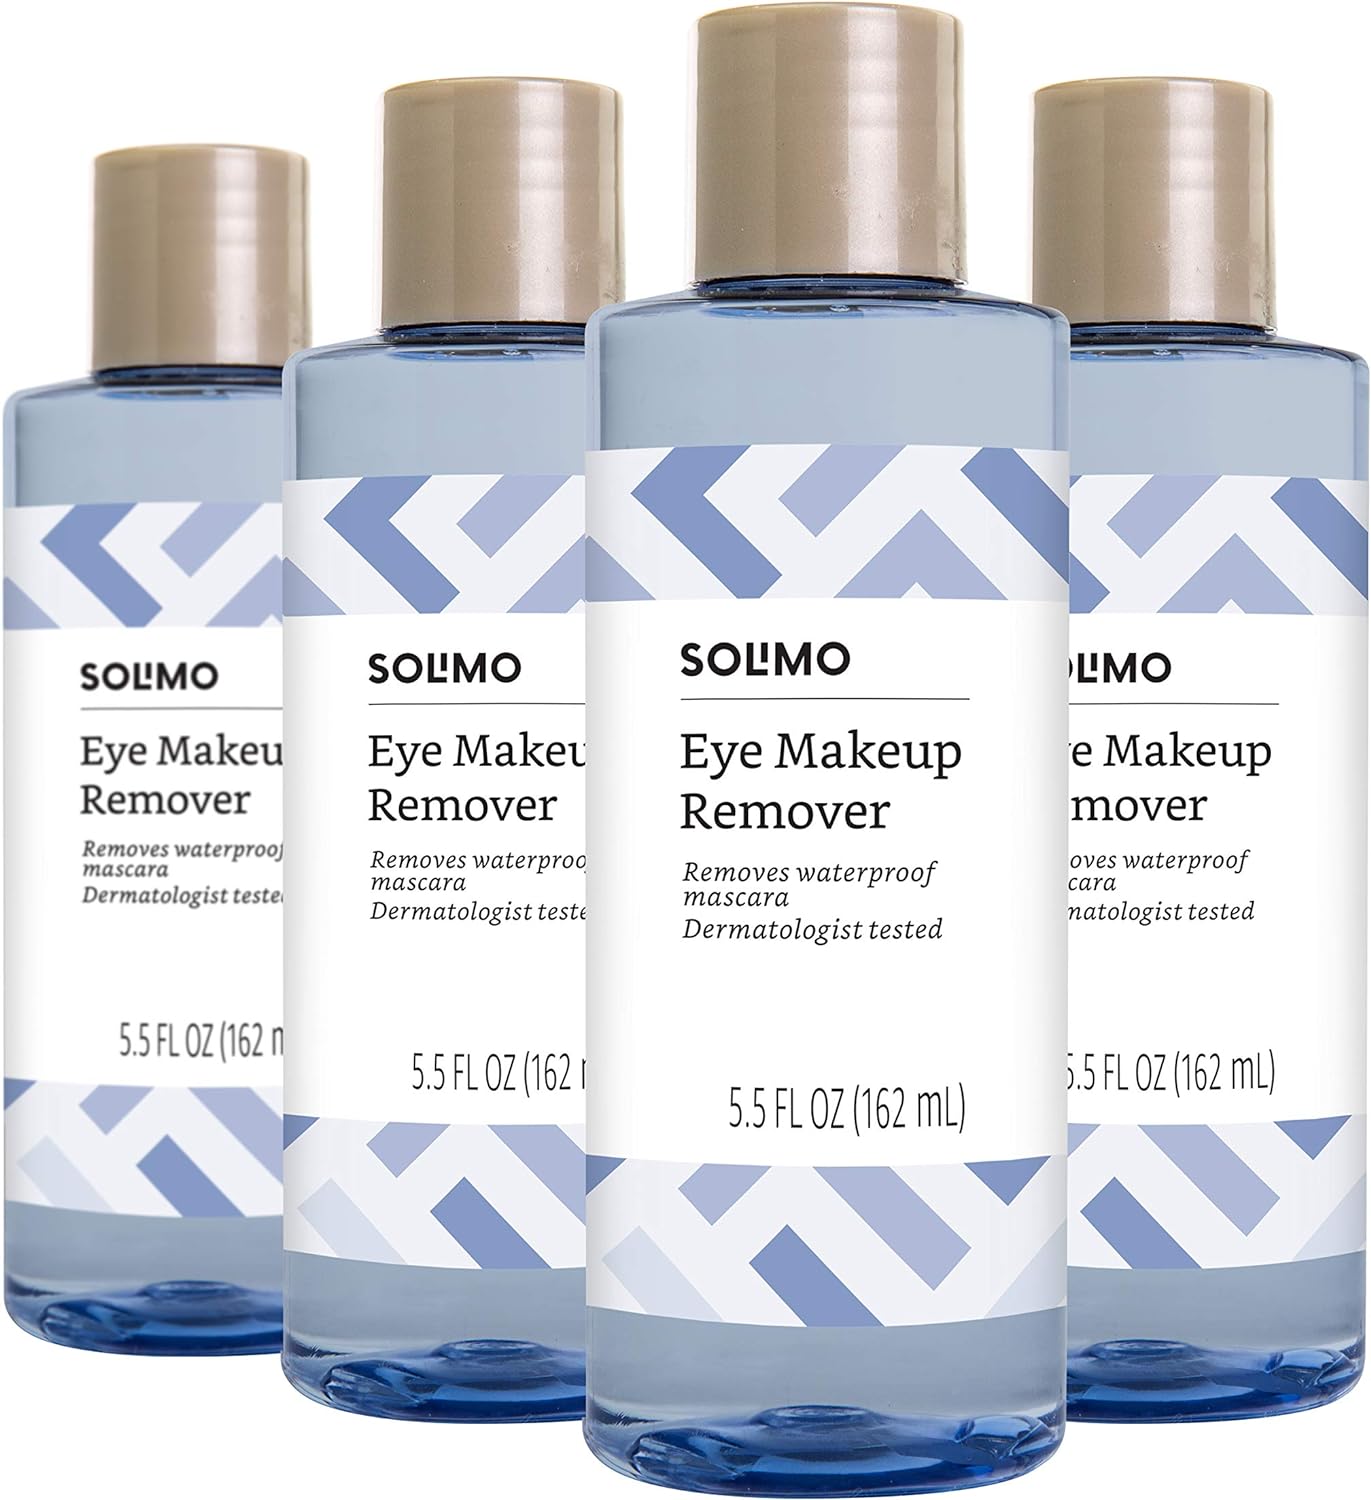 Solimo Eye Makeup Remover Pack of 4